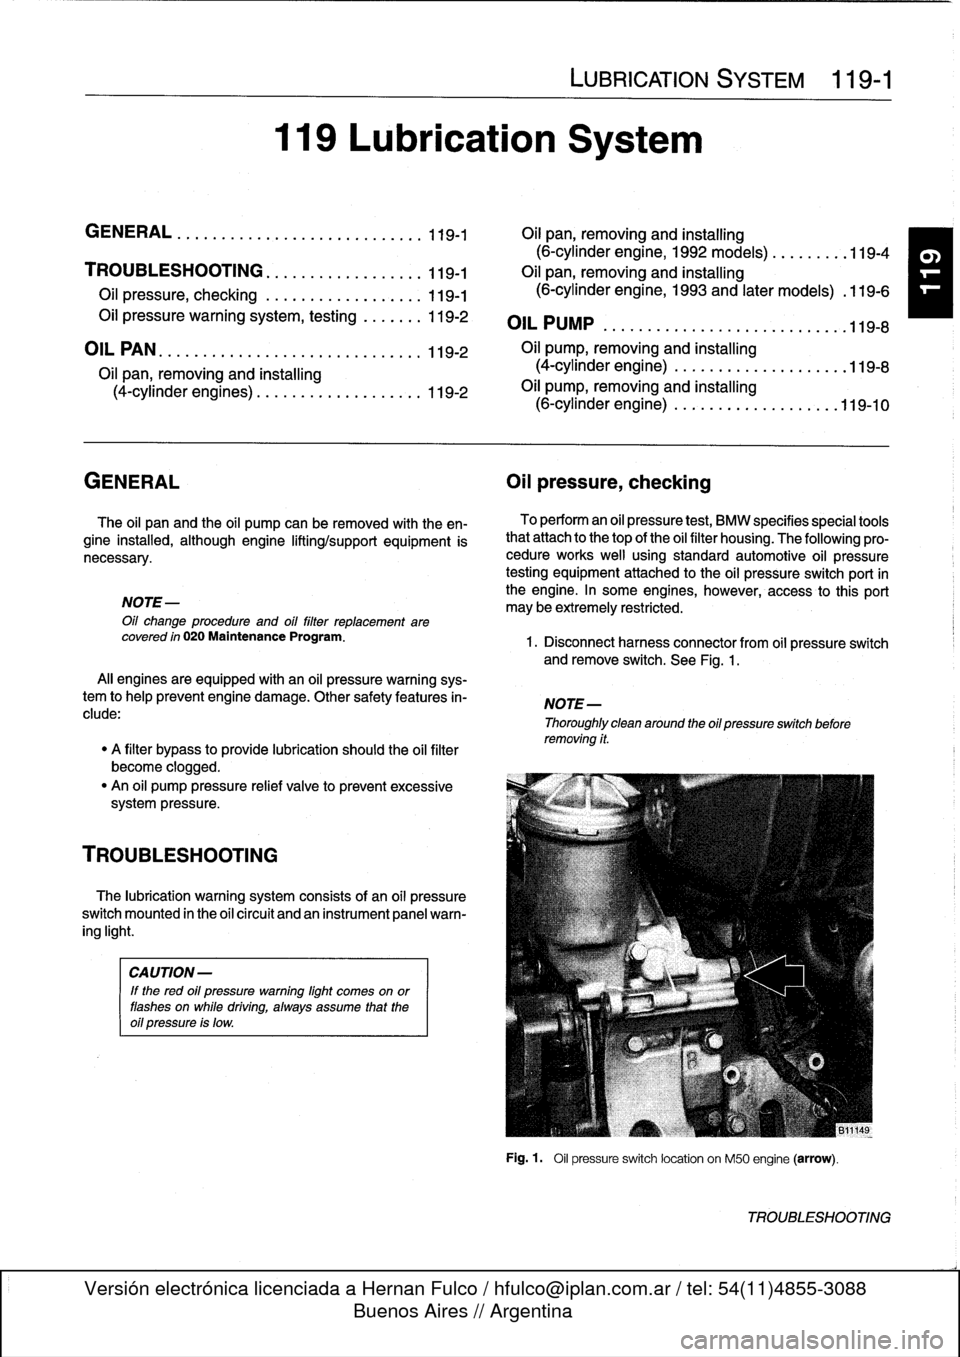 BMW 323i 1995 E36 Service Manual 
119
Lubrication
System

LUBRICATION
SYSTEM

	

119-1

GENERAL
.
.
.
.
.
.
...
.
.
.
.
.
.
.
...,
,
...
.
.
.
.
119-1

	

OH
pan,
removing
and
installing

(6-cylinder
engine,
1992
models)
.
.
.
.
.
.
